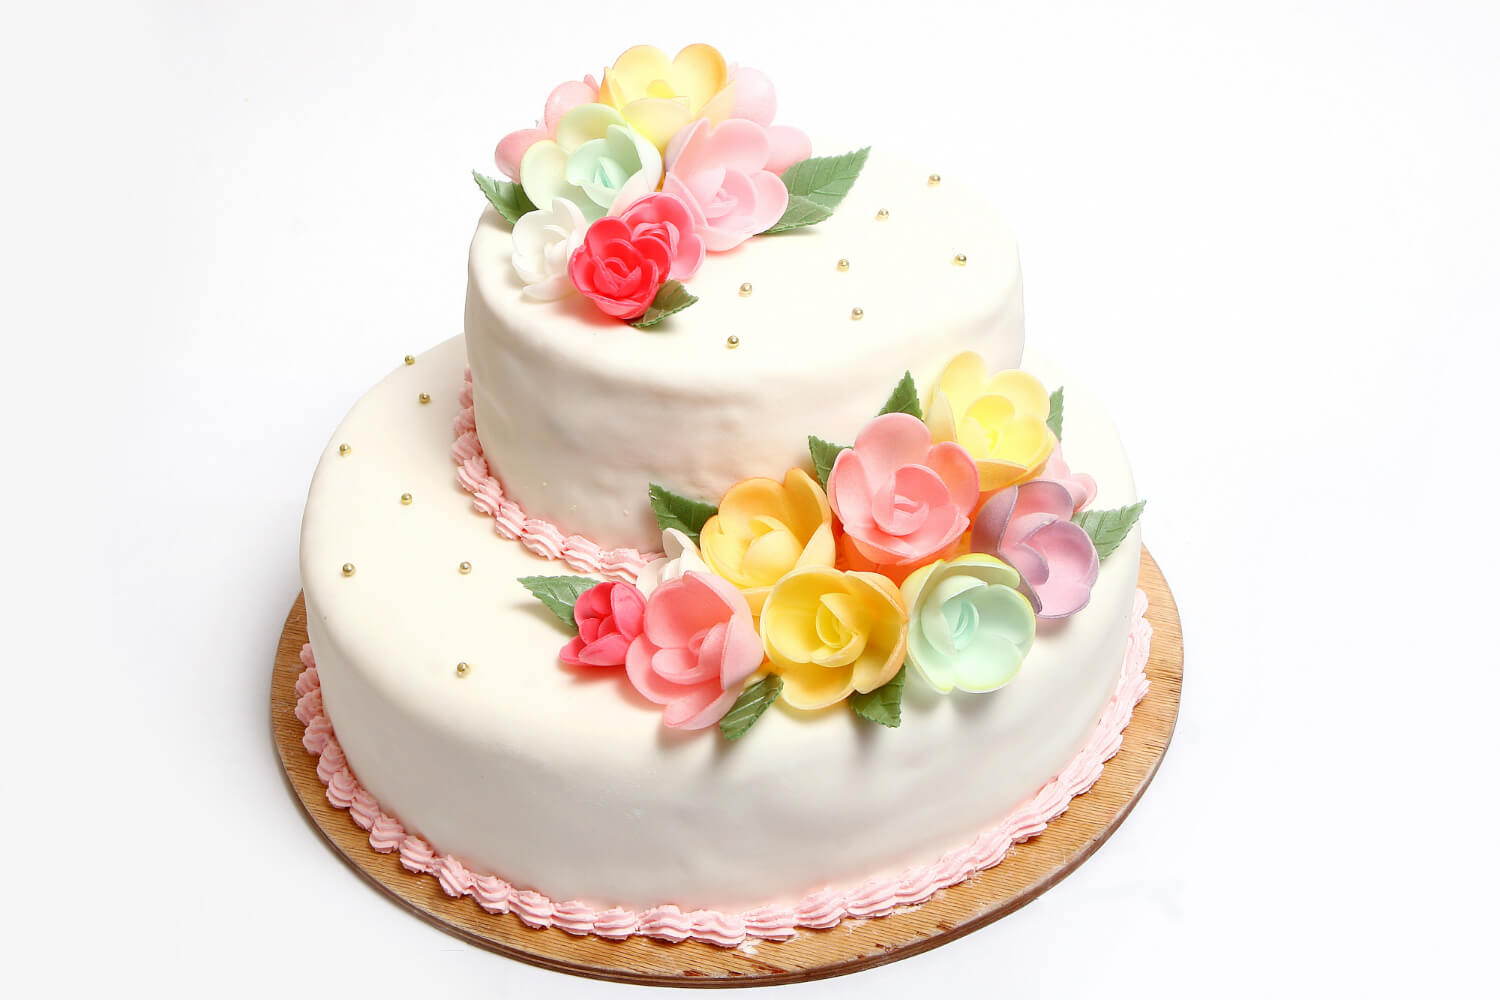 Some Theme cakes are Listed Availing in Cake delivery in Hyderabad